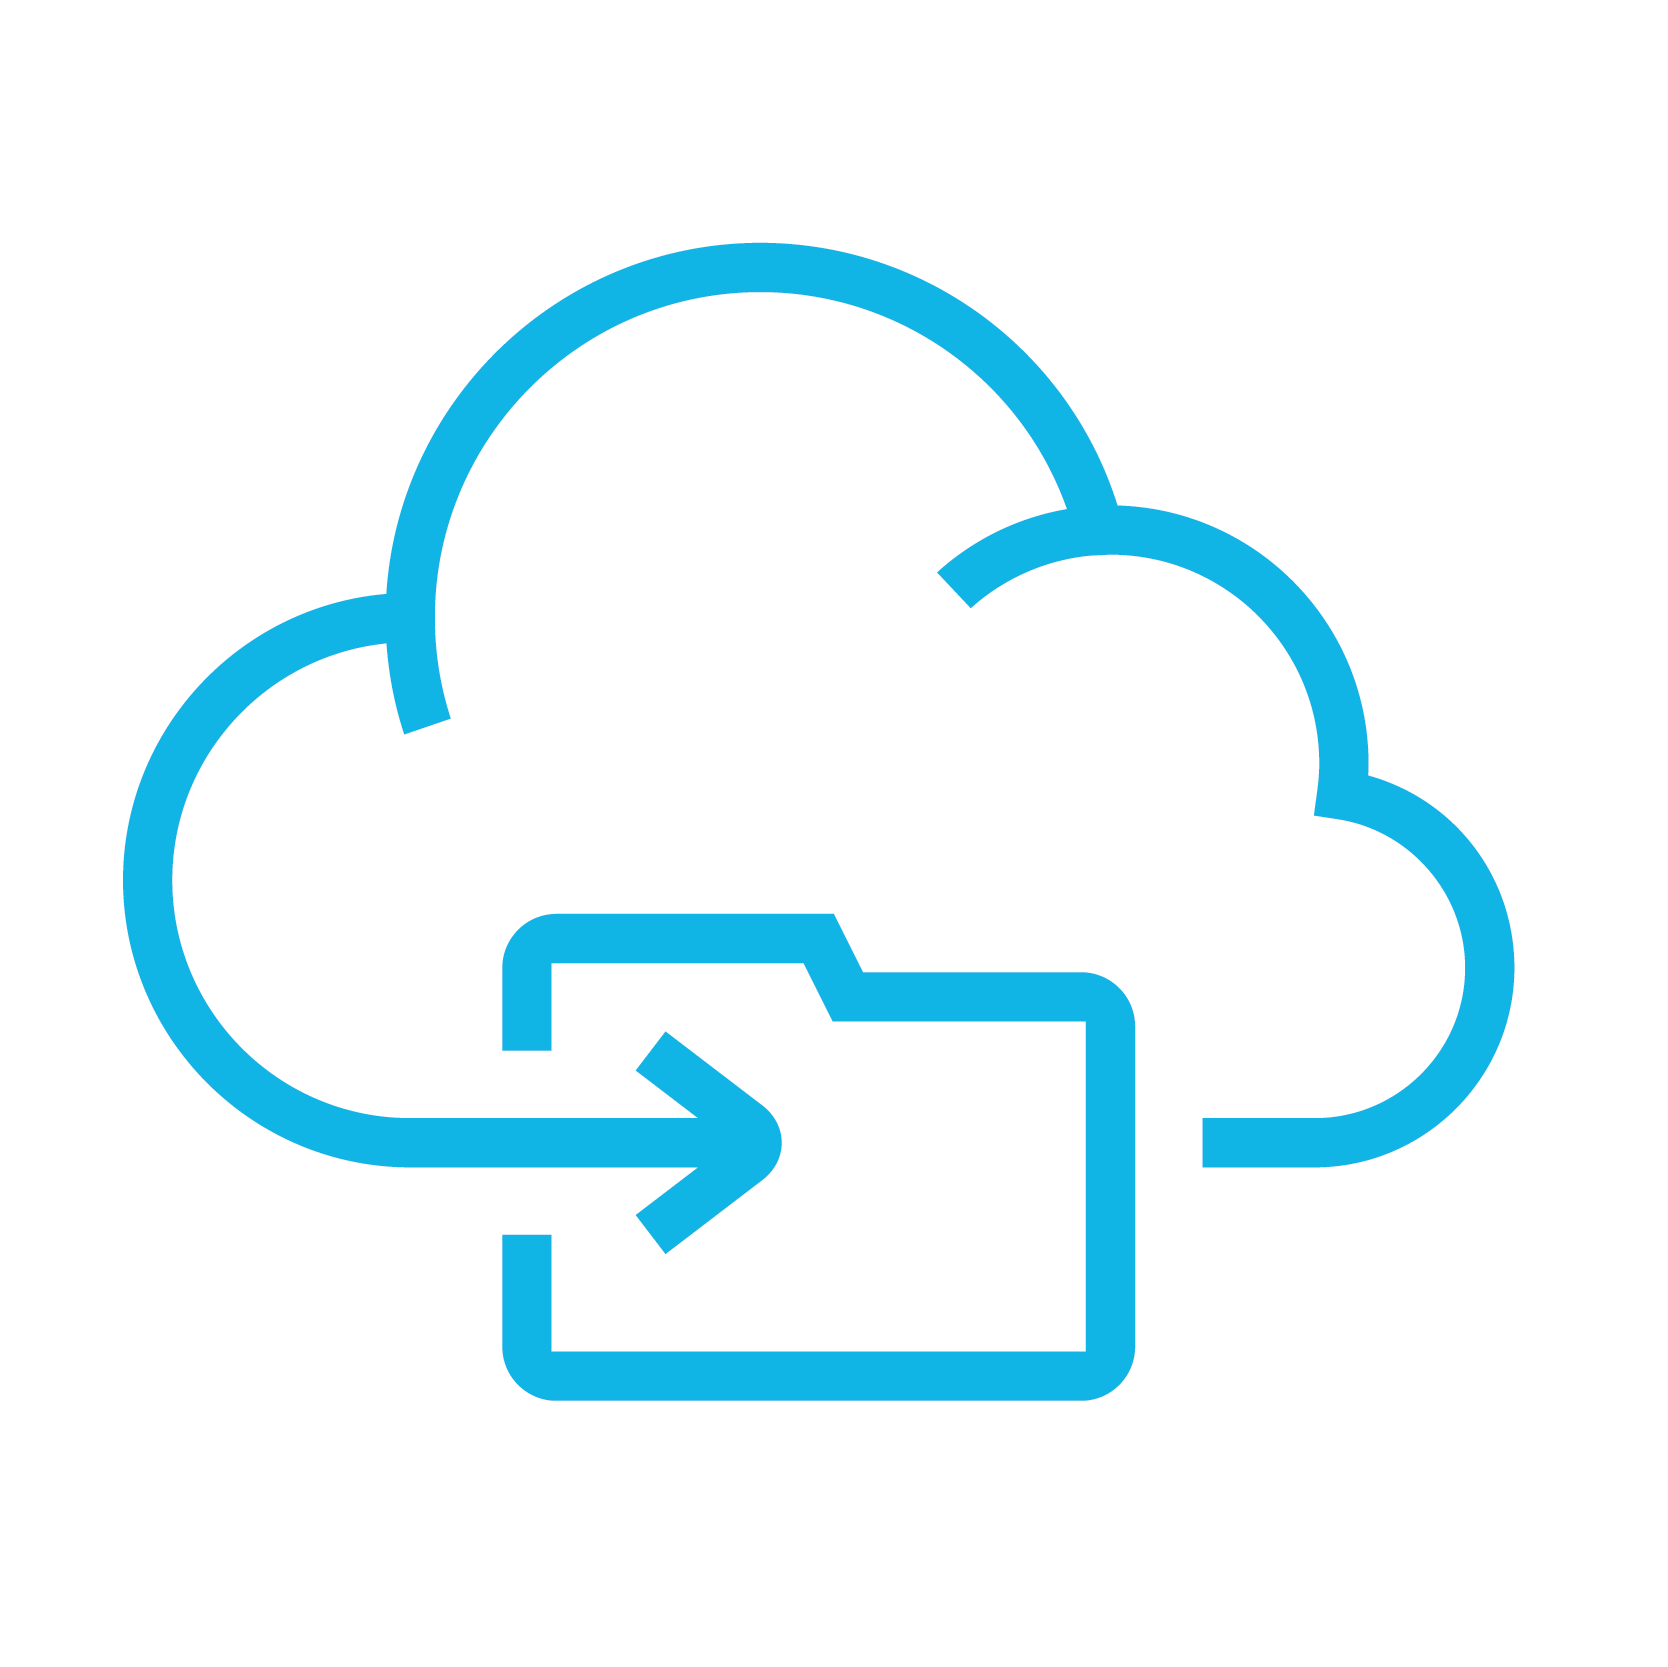 Cloud Flexibility - An icon of a cloud wrapped around a file folder.  This represents the fact that you have access to your data anywhere and at any time when you use HammerTech's platform.  